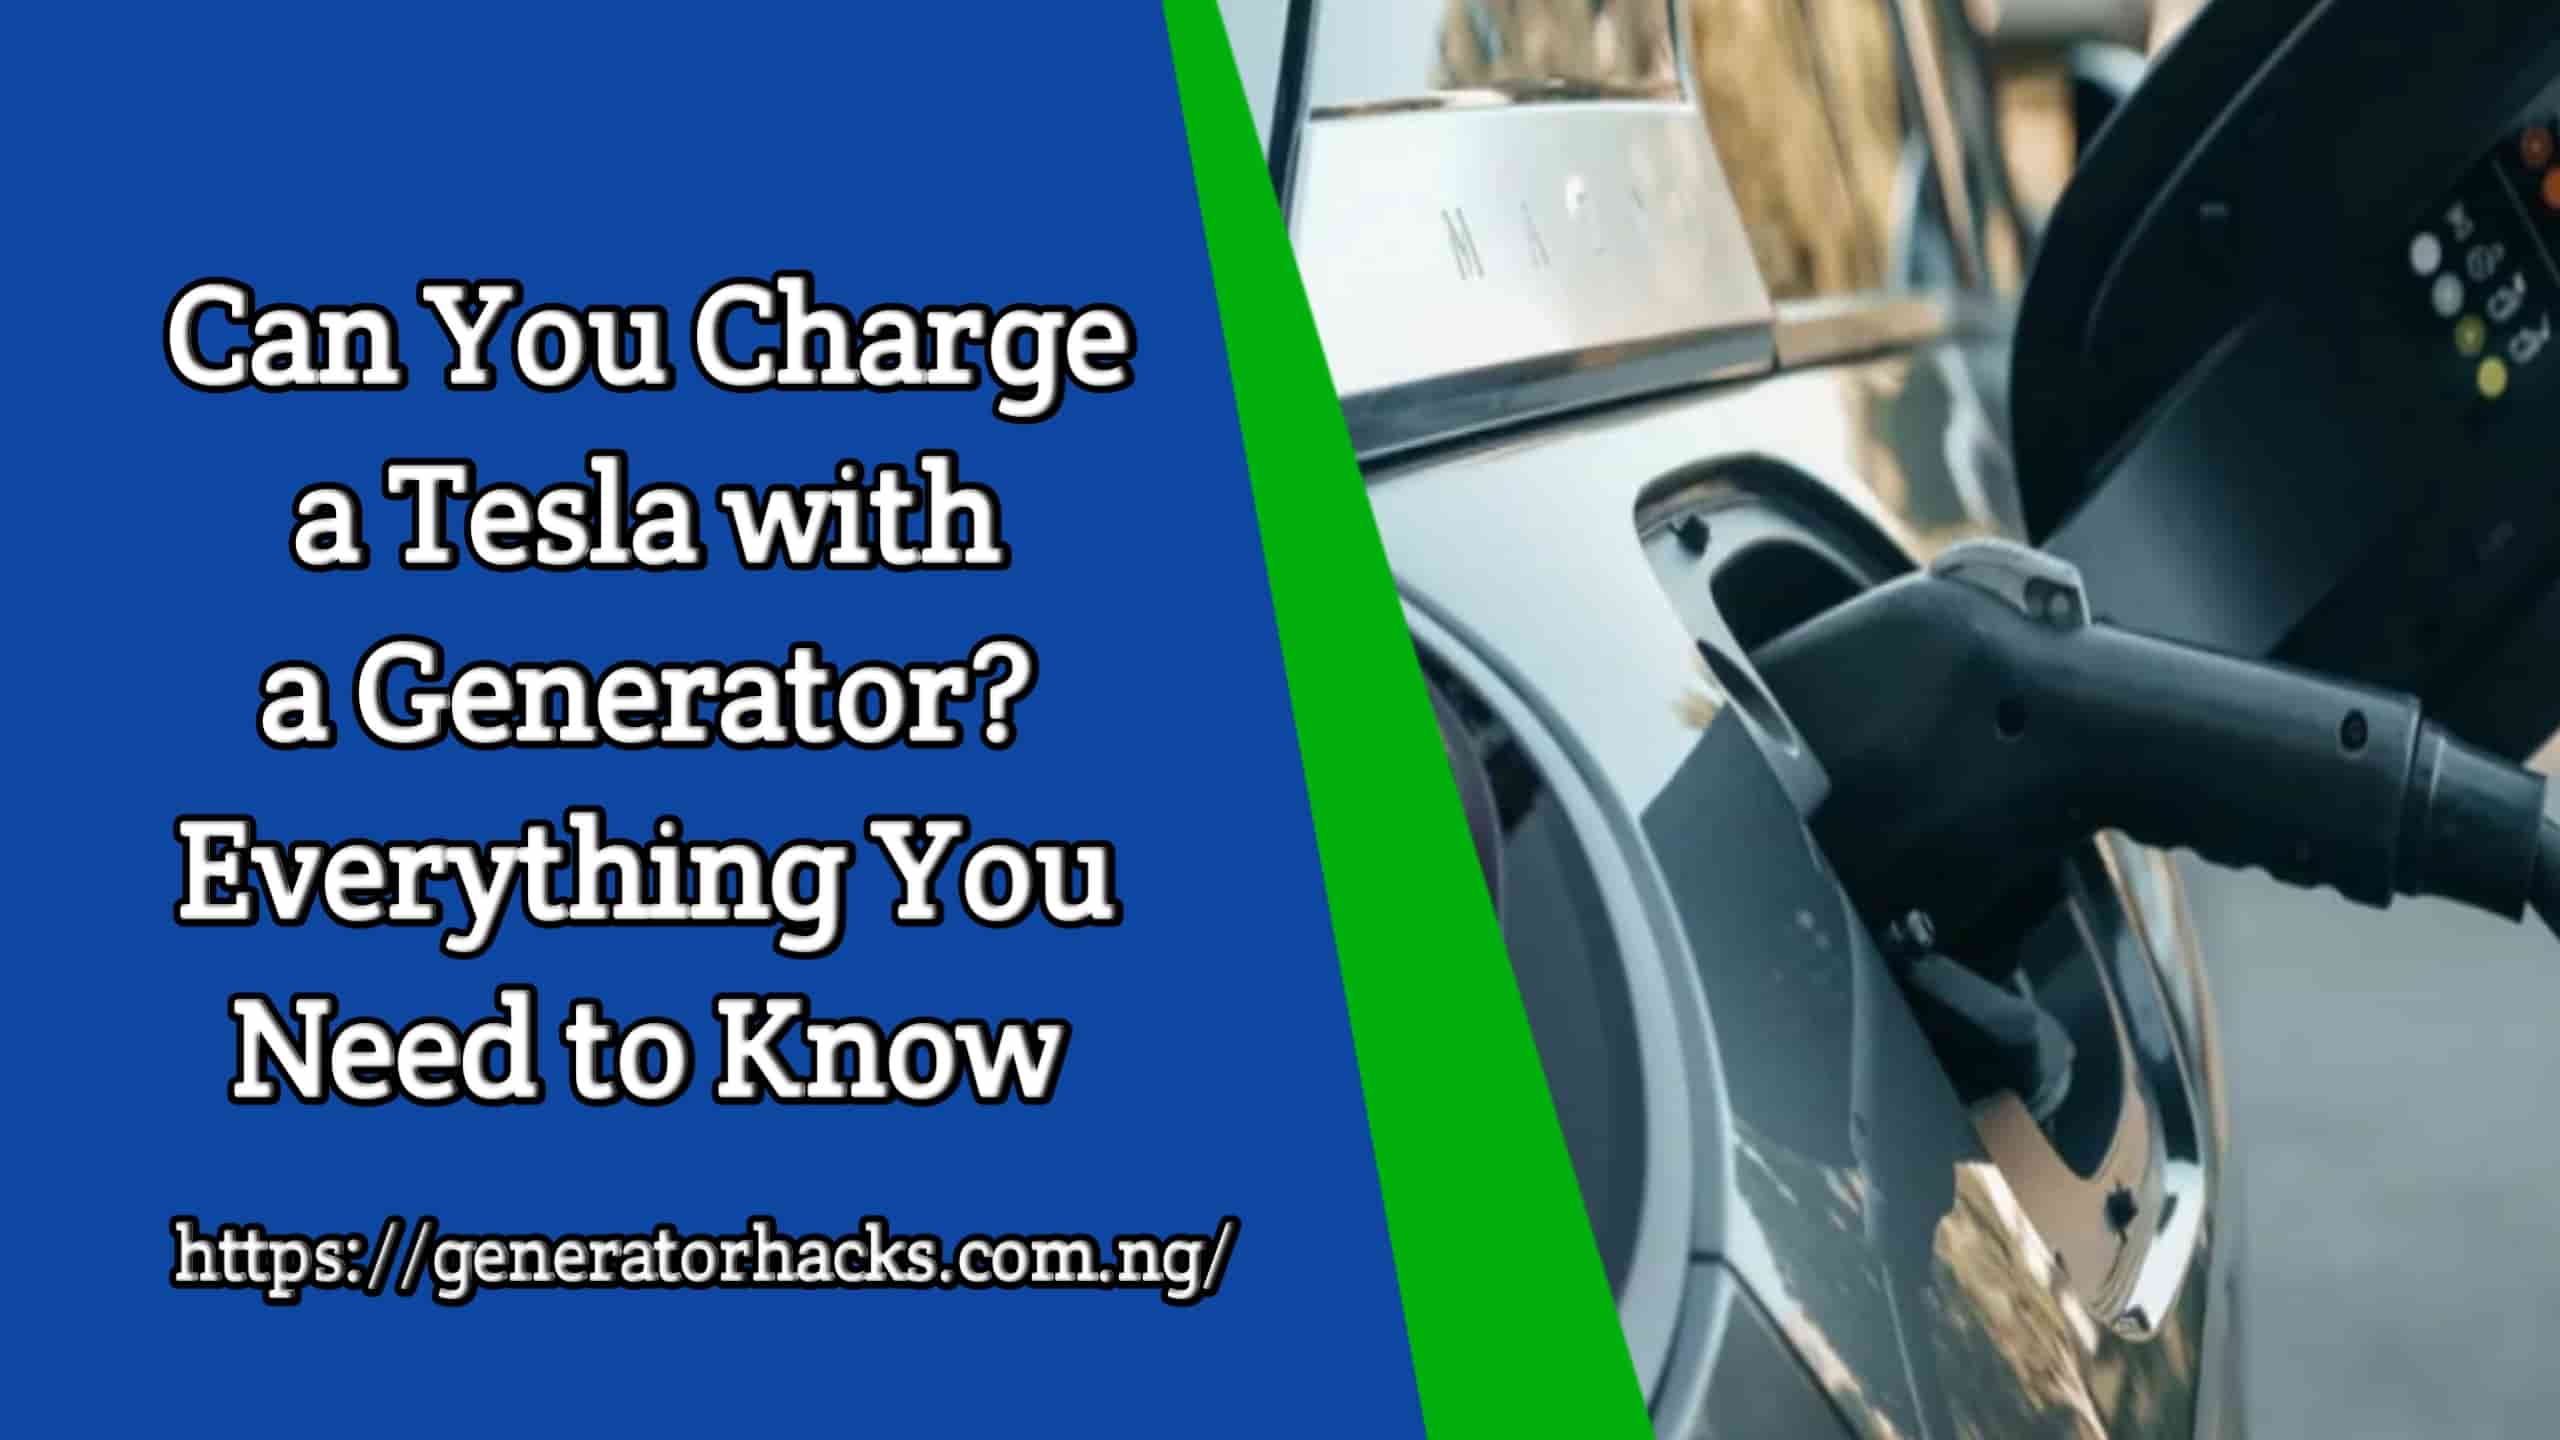 Can You Charge a Tesla with a Generator? Everything You Need to Know